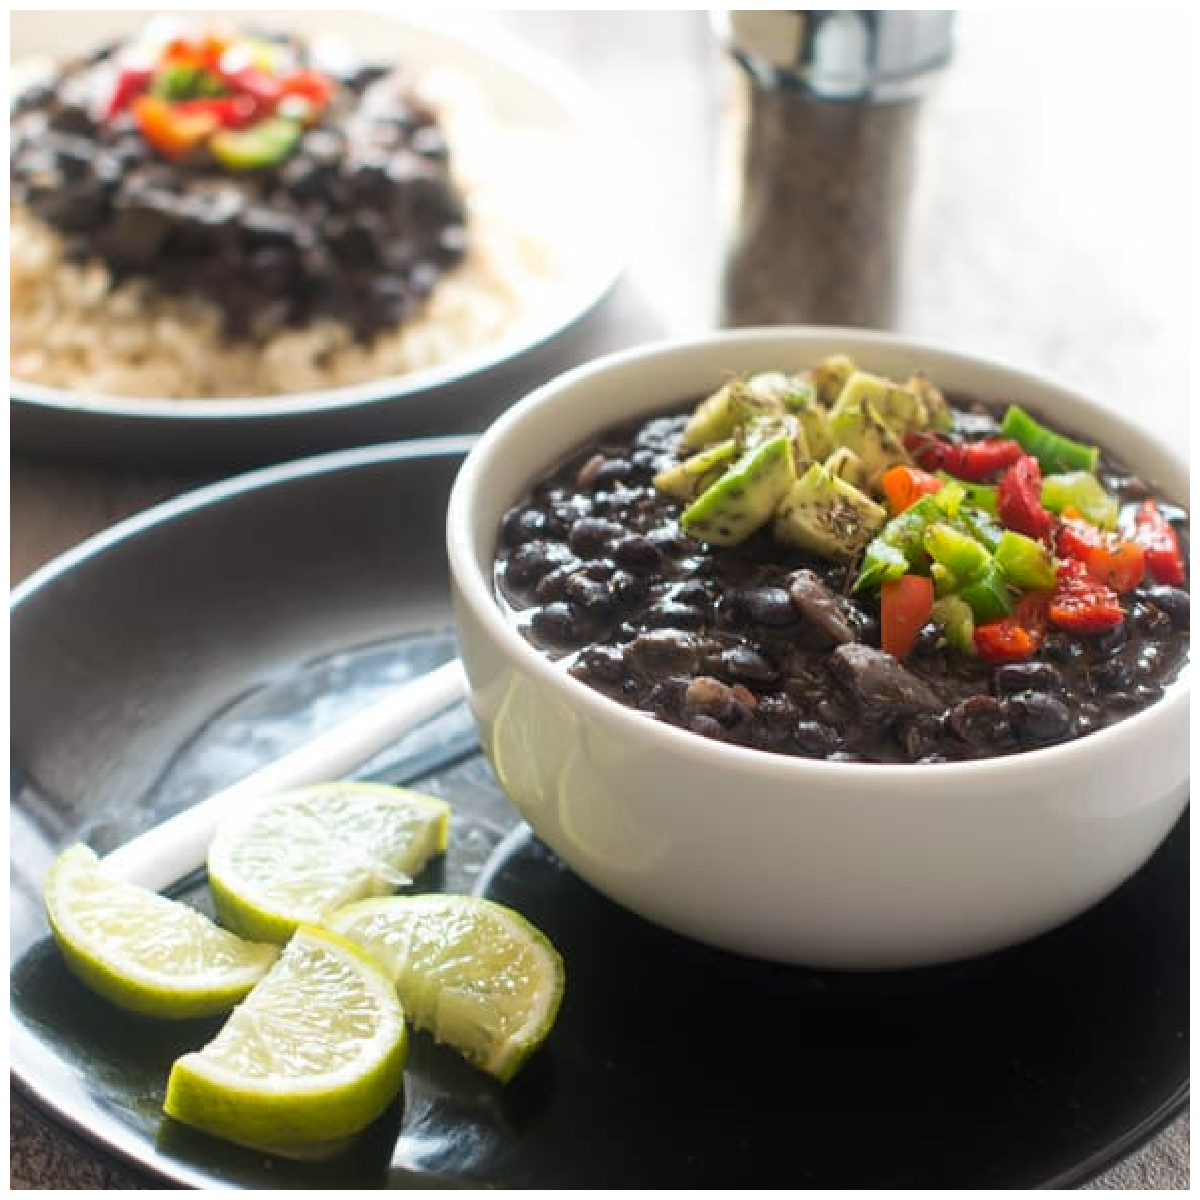 A bowl with cooked black beans topped with diced avocado and green and red bell peppers.